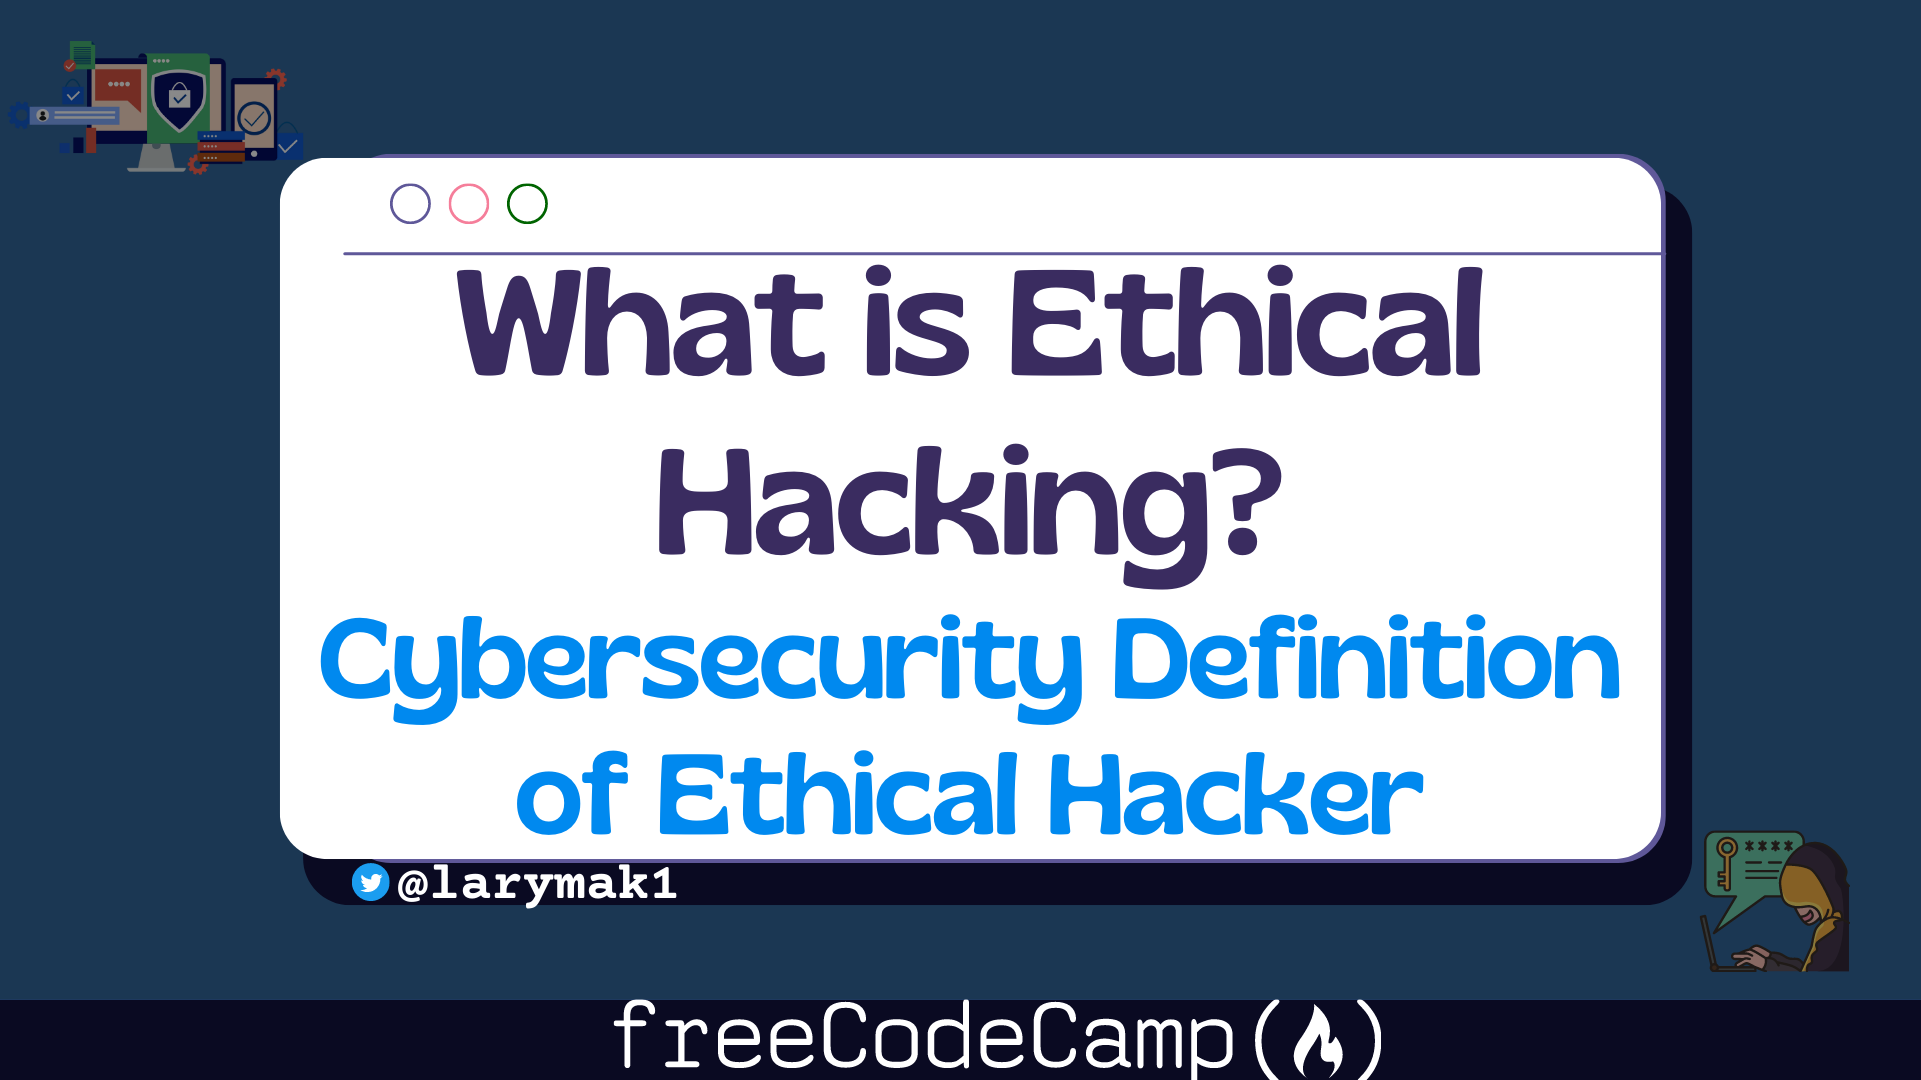 What is ethical hacking and how is it different from hacking as we know it?